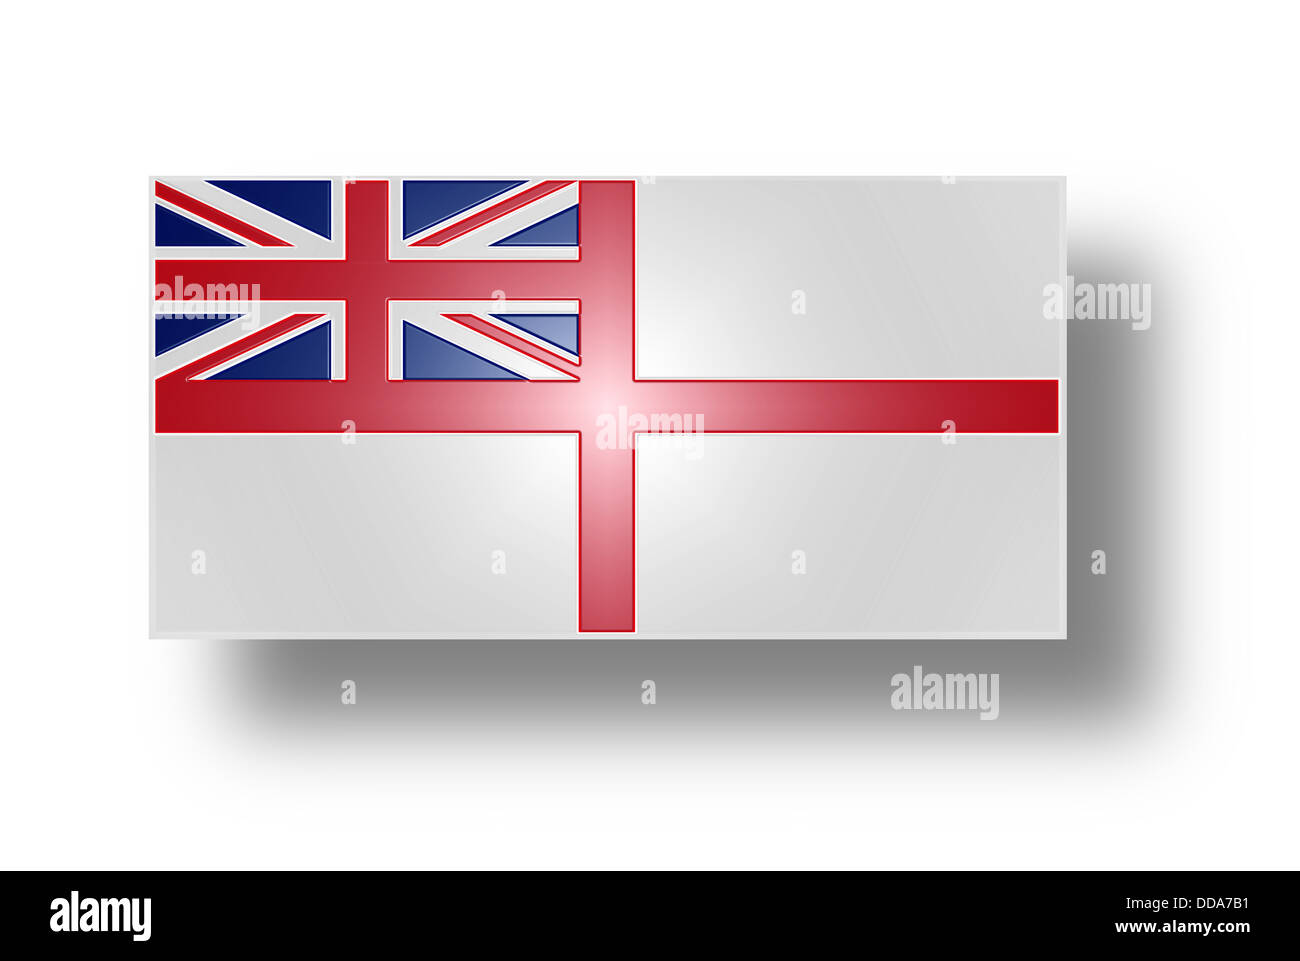 Naval ensign of the United Kingdom (White Ensign). Stylized I. Stock Photo